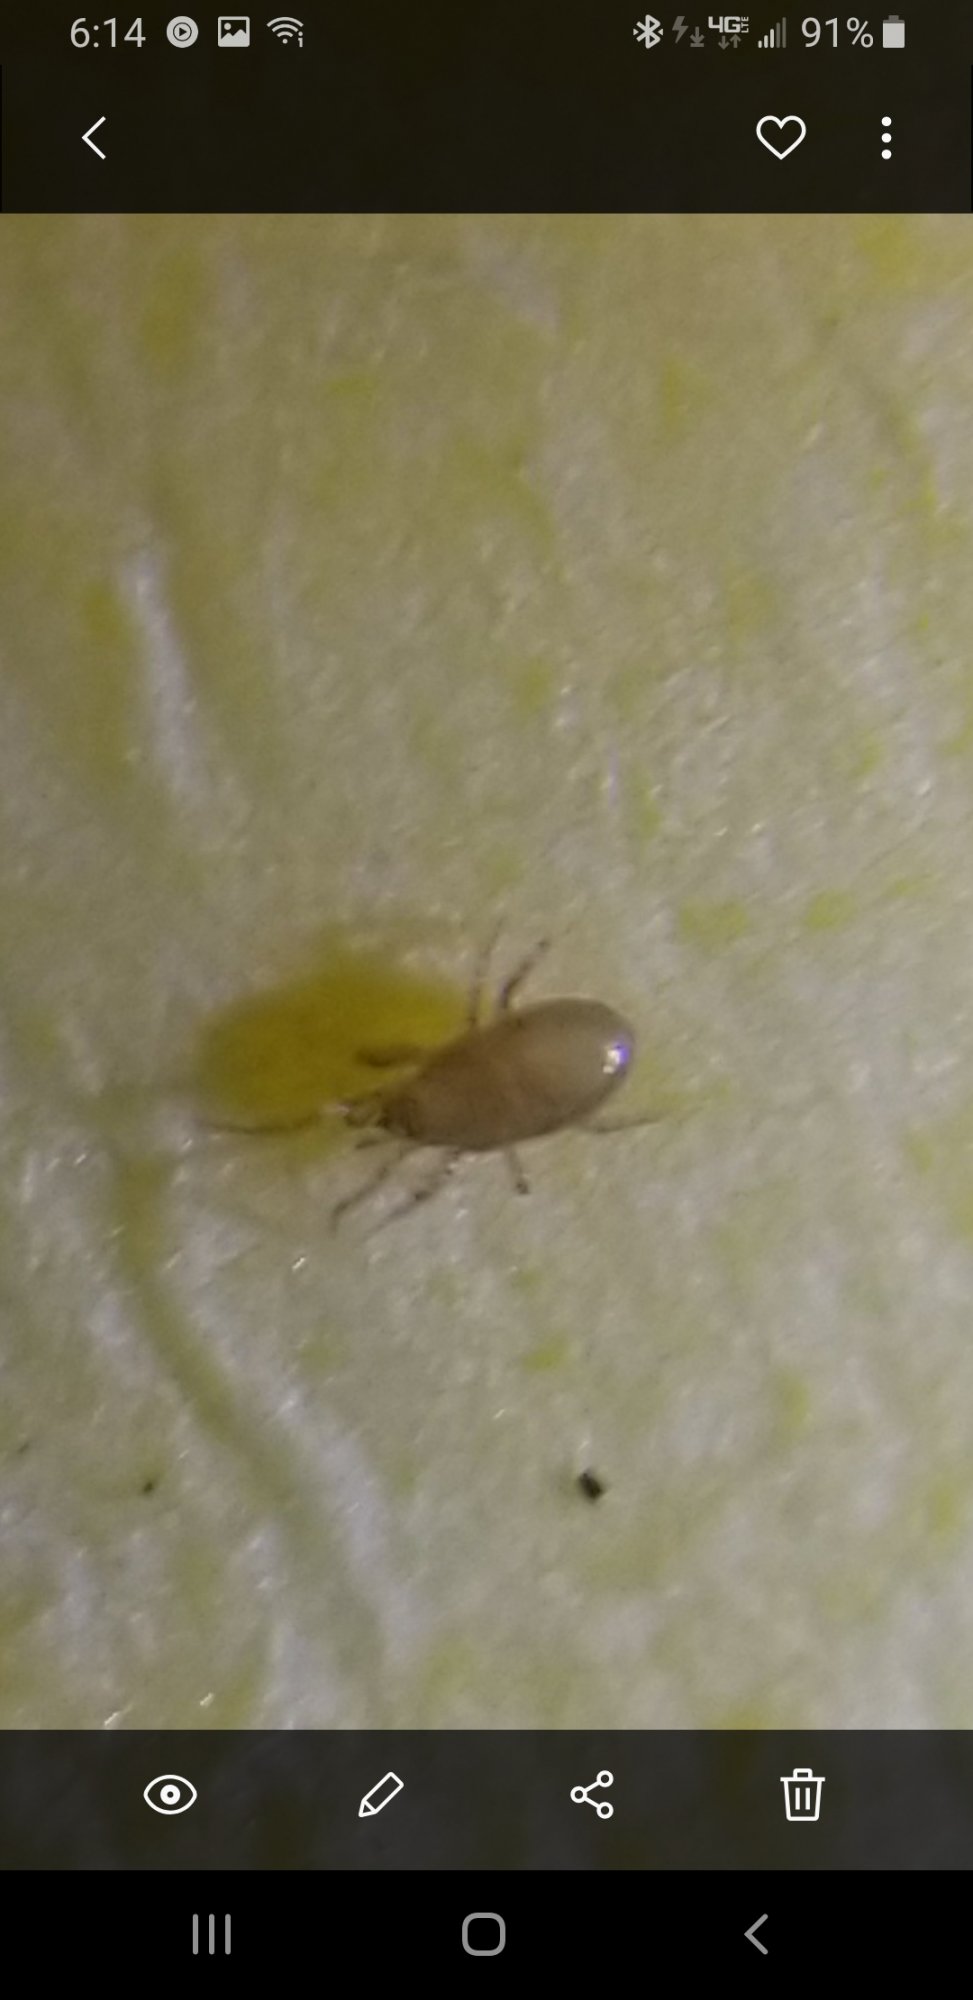 What kind of mite is this